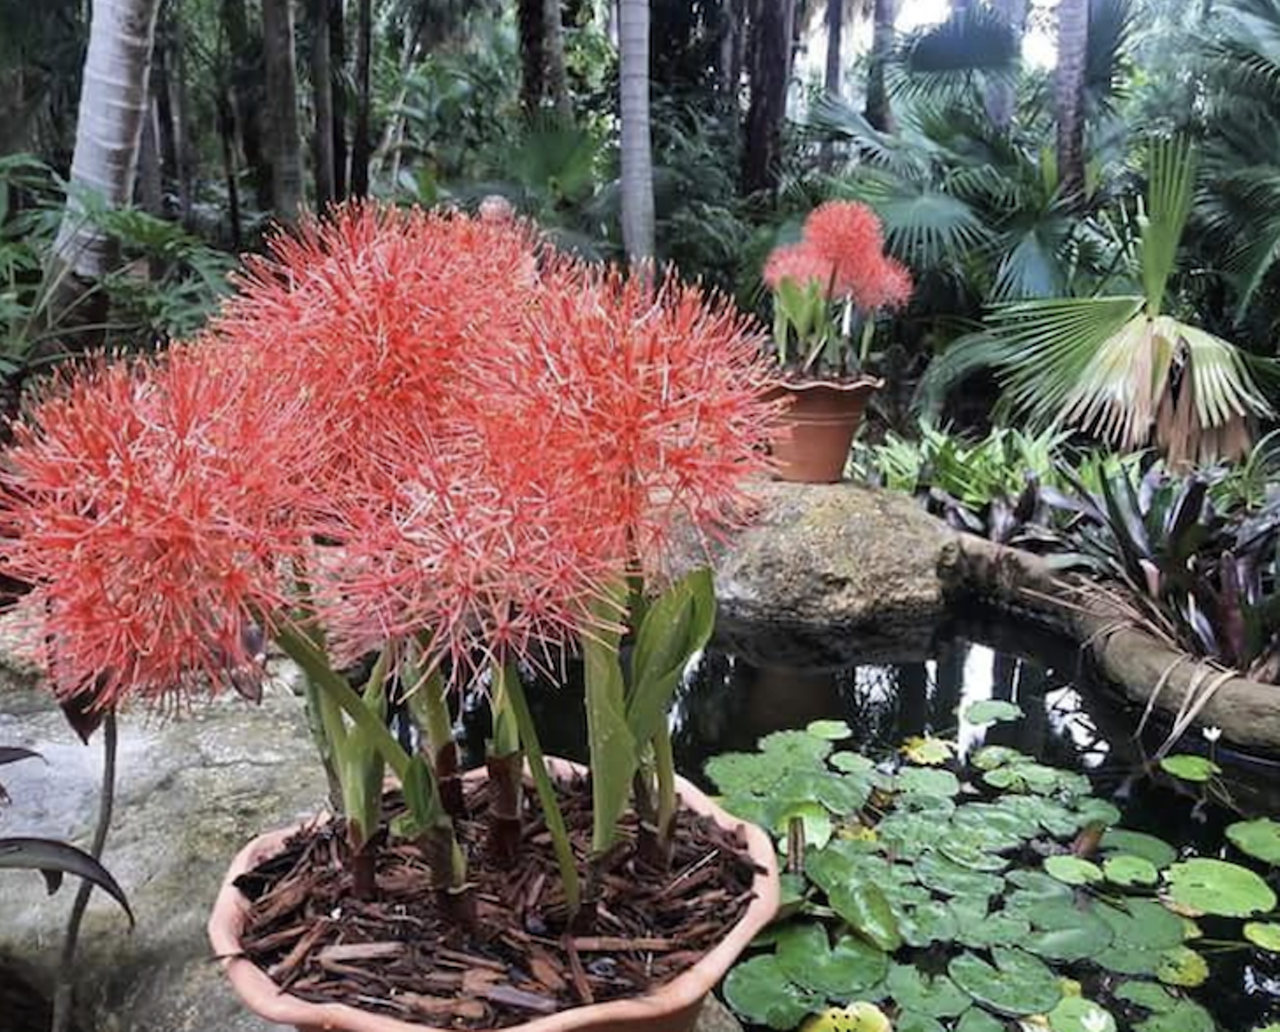 Sunken Gardens  
1825 4th St N, St. Pete, 727-893-7111
Sunken Gardens is a botanical paradise in the midst of a bustling city. As St. Petersburg's oldest living museum, this 100-year-old garden is home to some of the oldest tropical plants in the region.
Photo via Sunken Gardens/Instagram